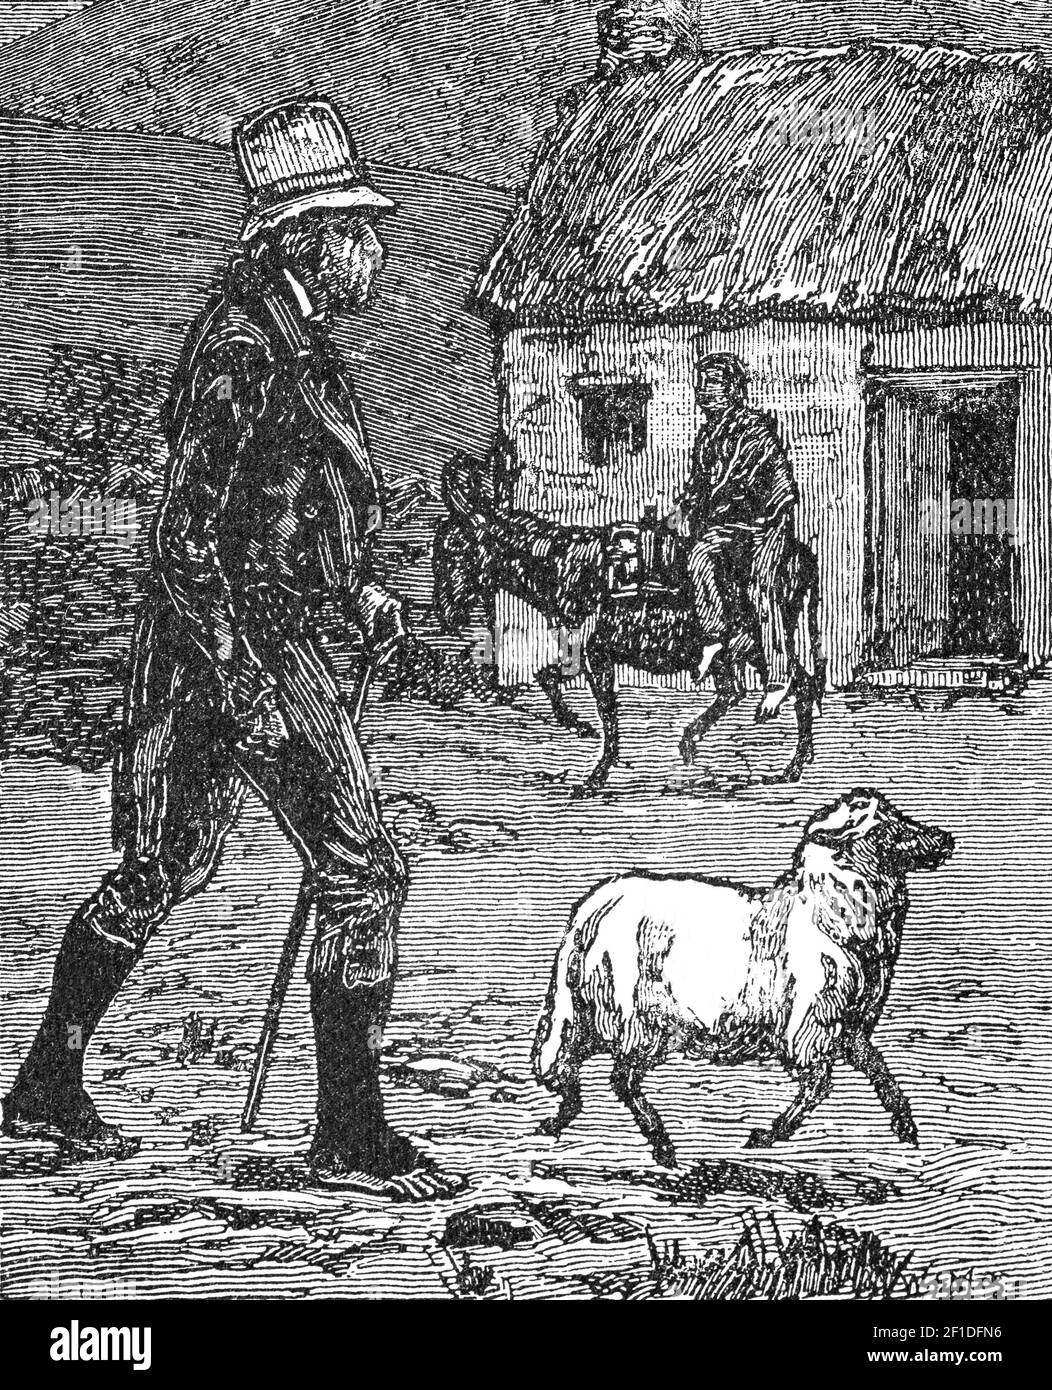 A drawing illustrating the rural nature of street life in Claddagh, Galway City in the 19th Century, Ireland Stock Photo